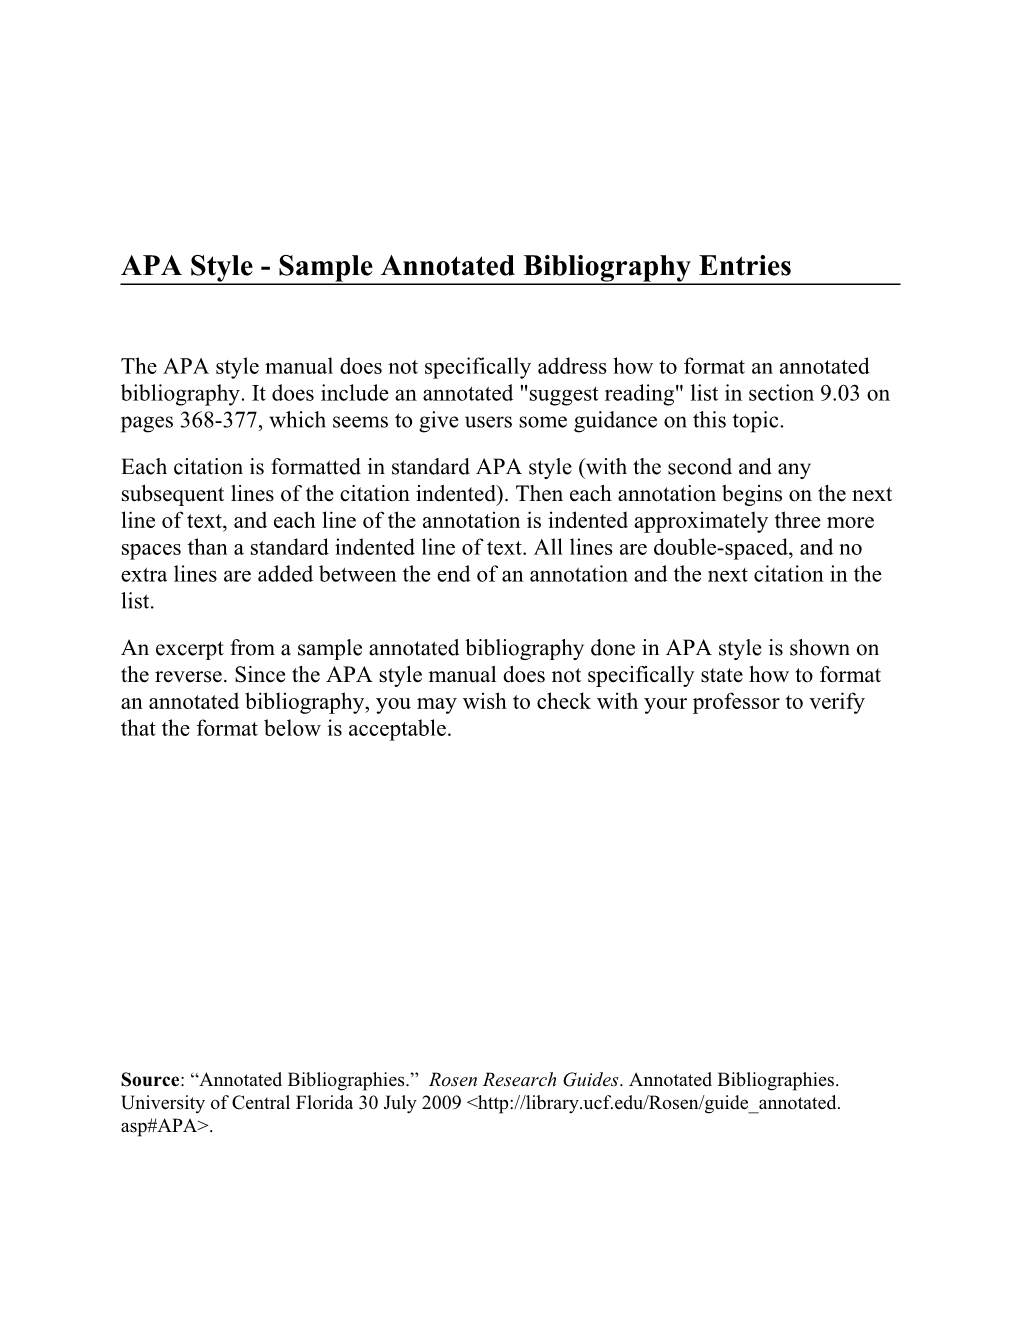 APA Style - Sample Annotated Bibliography Entries